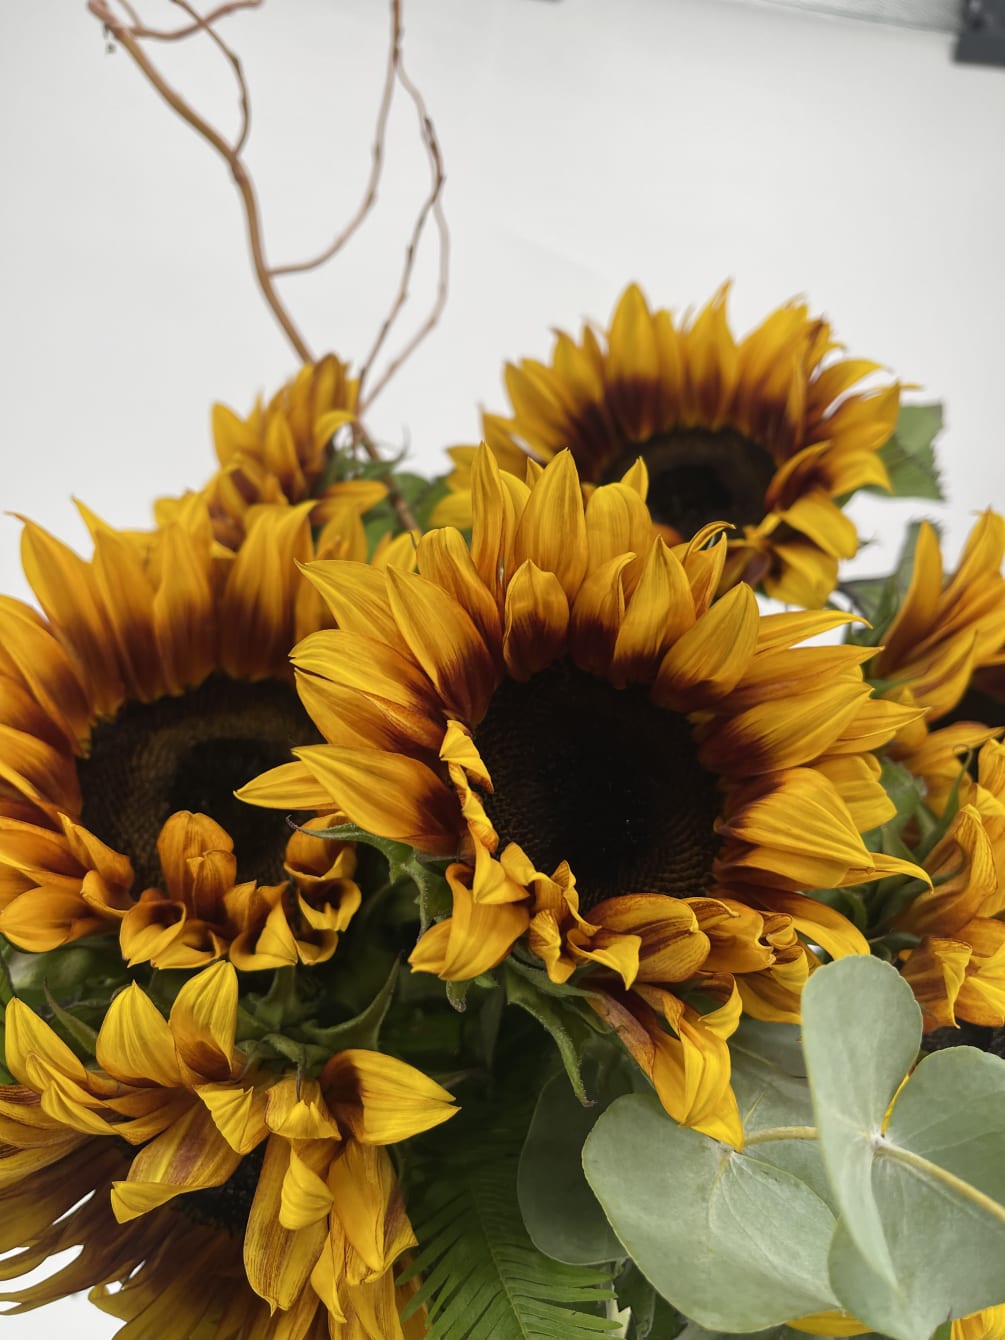 Gorgeous happy arrangement, 12 sunflowers with greenery around,  and some branches